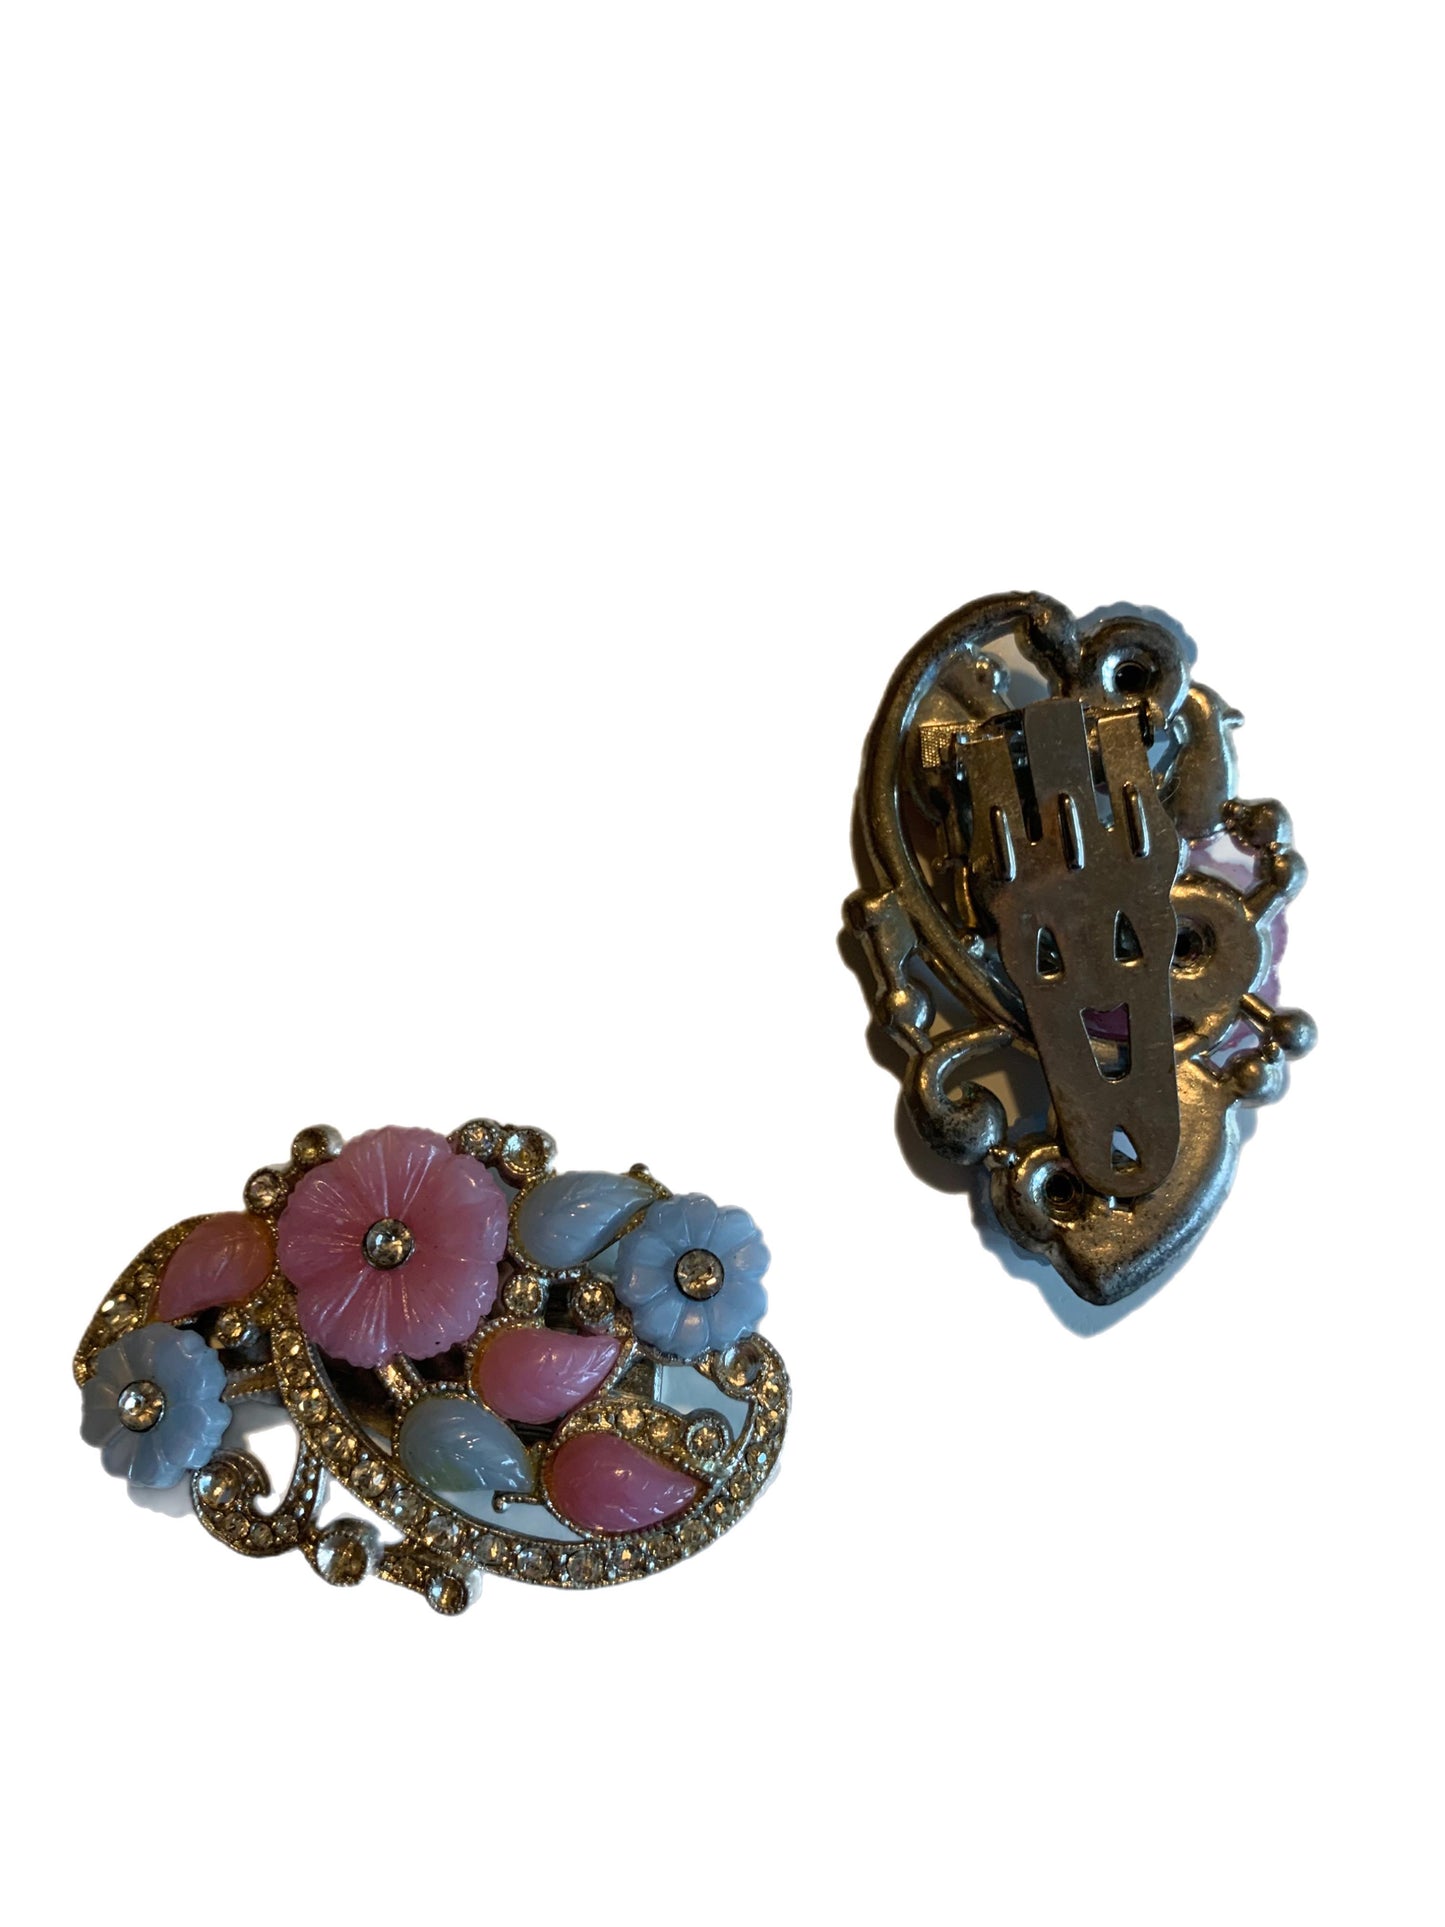 Pastel Floral Glass and Rhinestones Set of Fur Clips circa 1930s